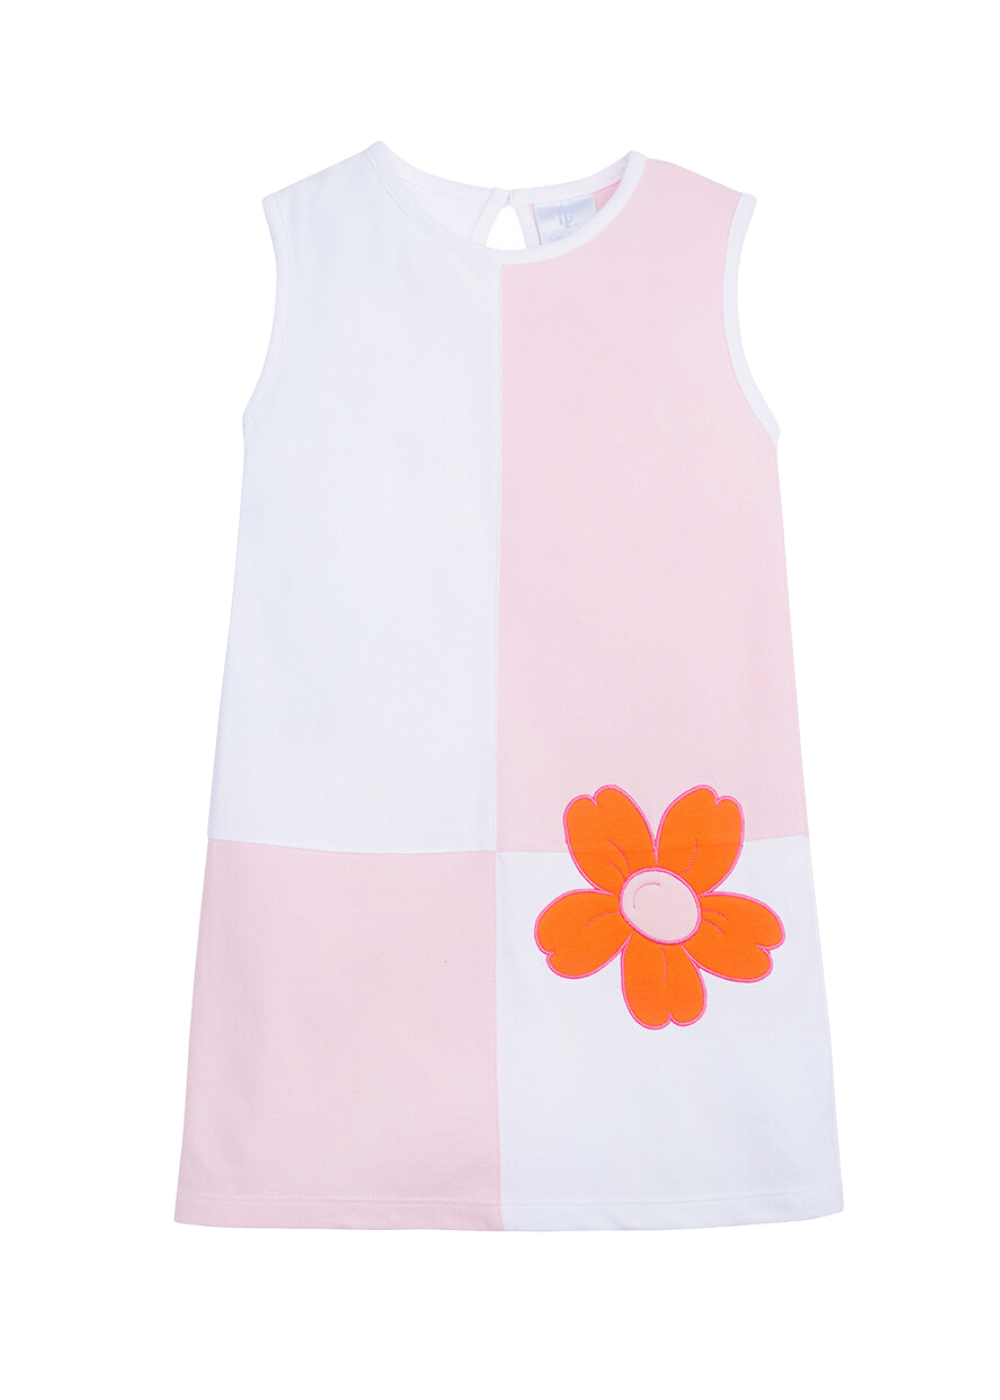 classic childrens clothing girls pink and white dress with orange flower emblem